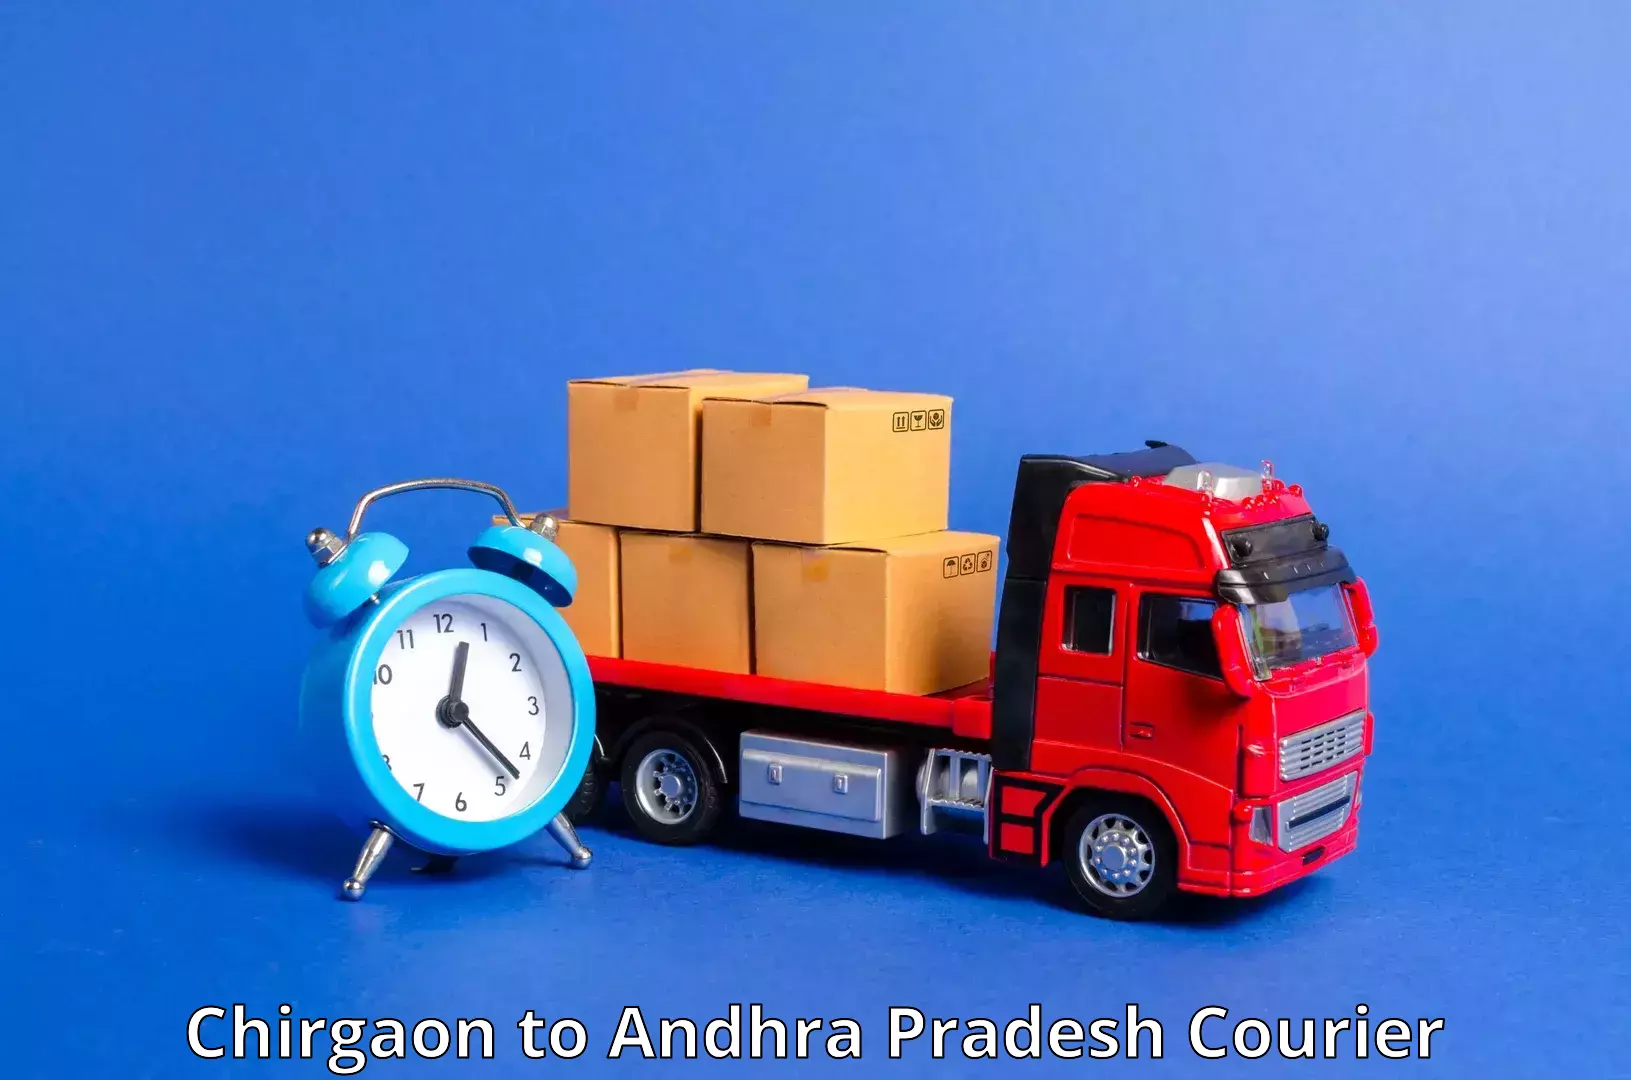 Automated shipping processes Chirgaon to Gudivada